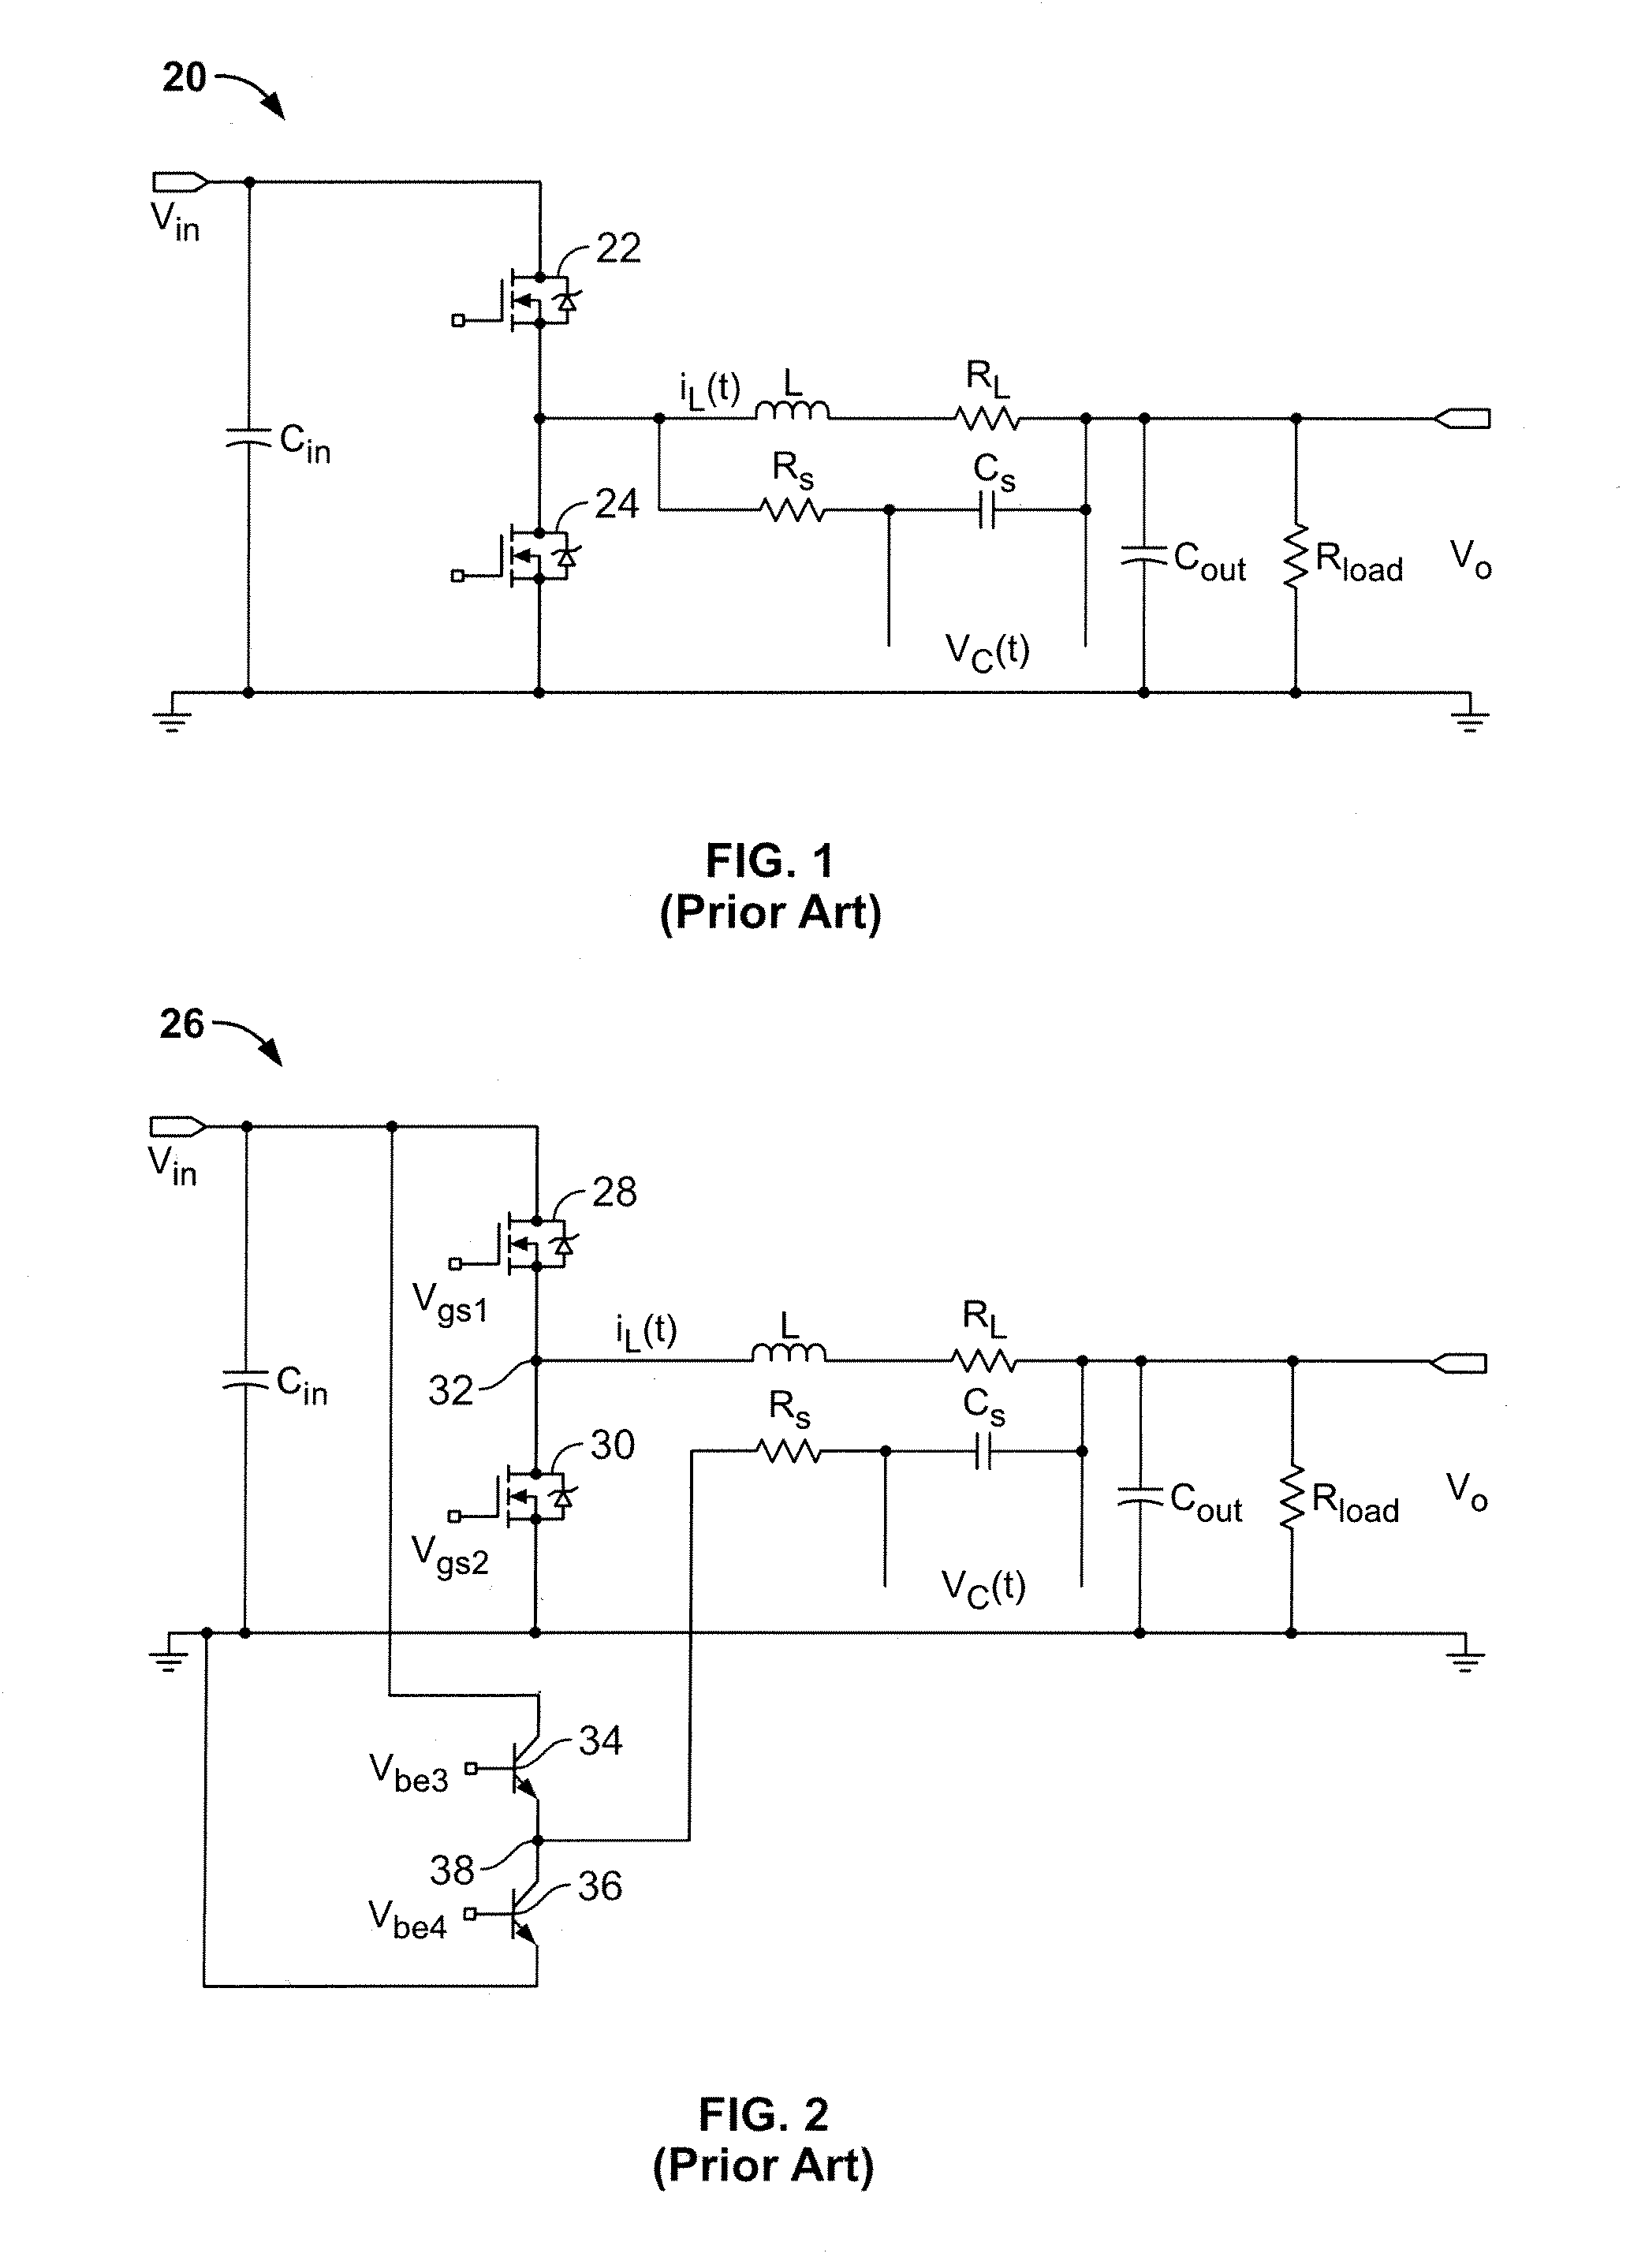 Method and apparatus for improved current mode control for large conversion ratio synchronous buck converter with lossless current sense